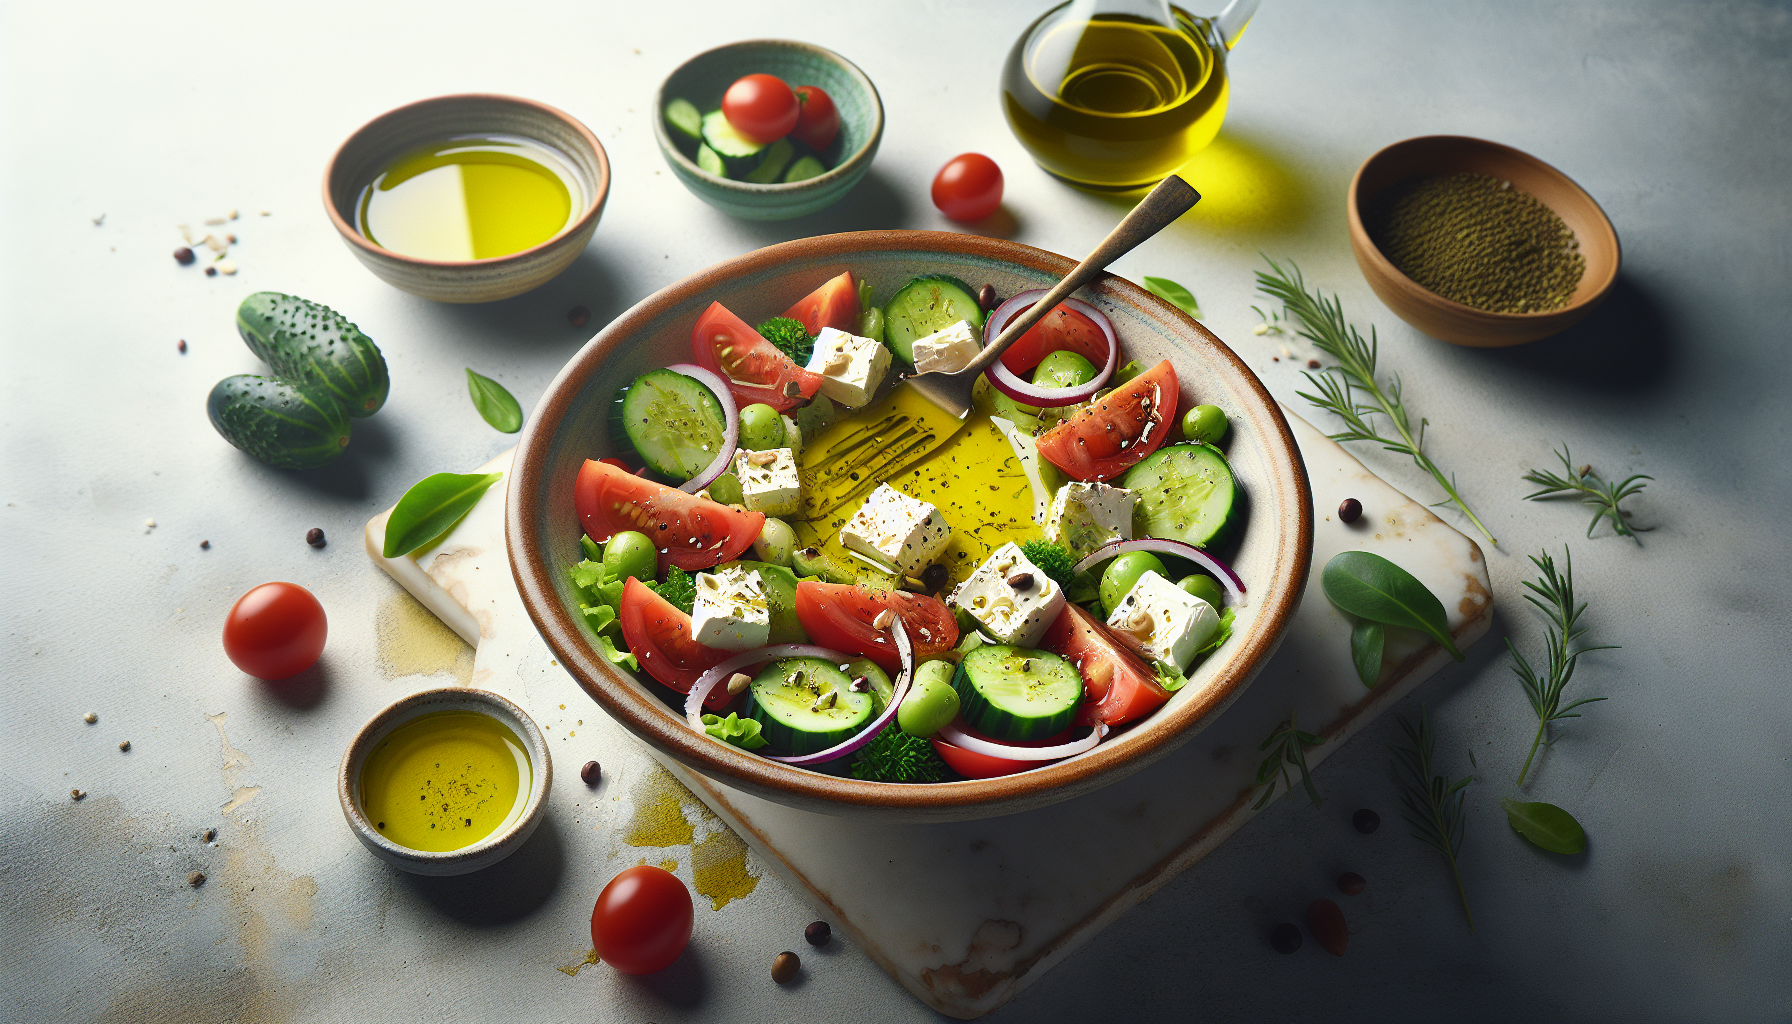 whats your healthy twist on a classic greek salad for a light lunch 2